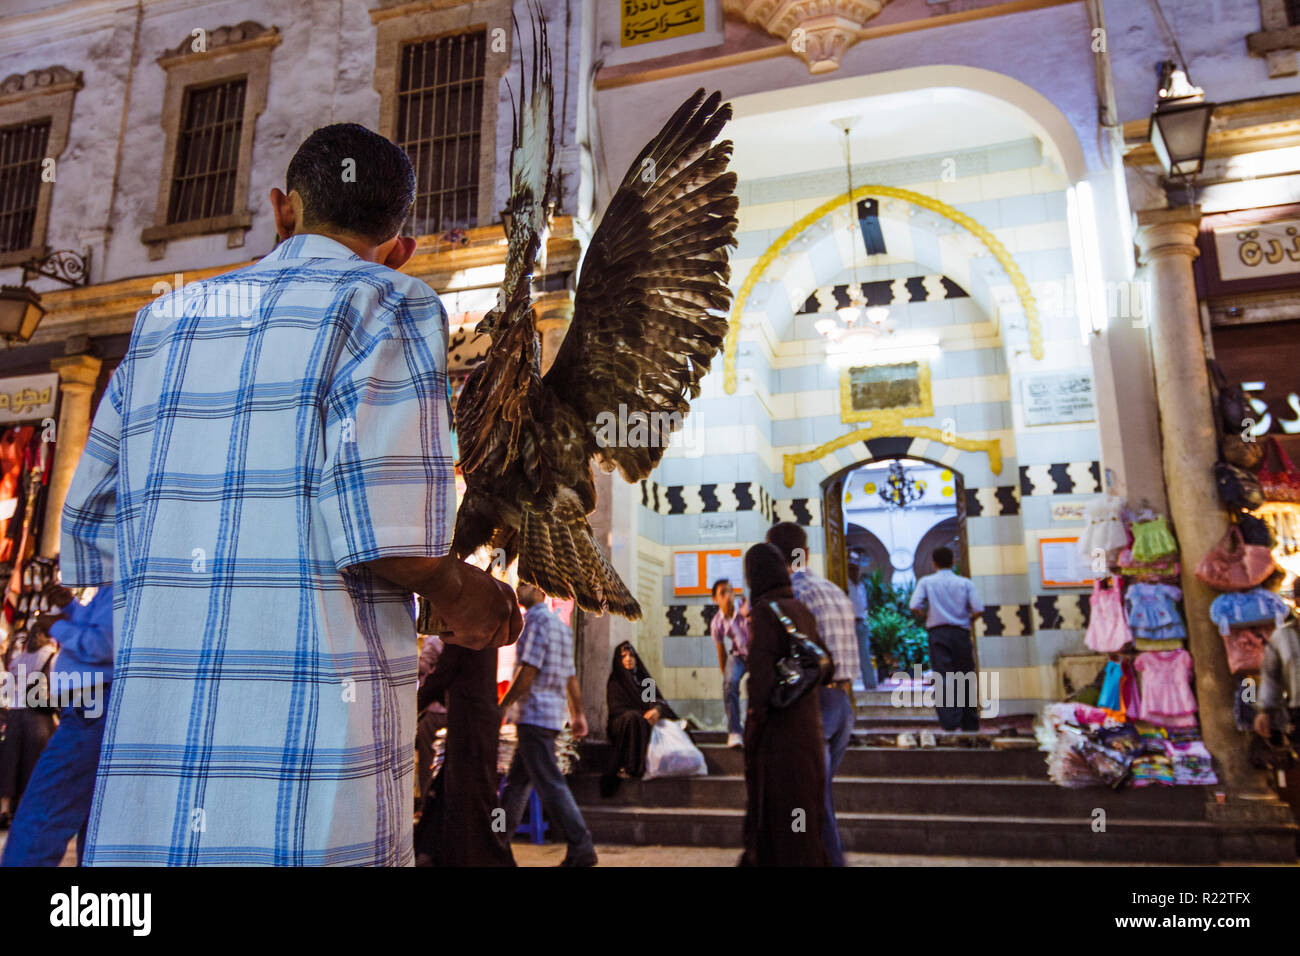 Damascus, Syria : Vendors and passersby opposite a mosque inside the Al-Hamidiyah Souq in the old town. Stock Photo